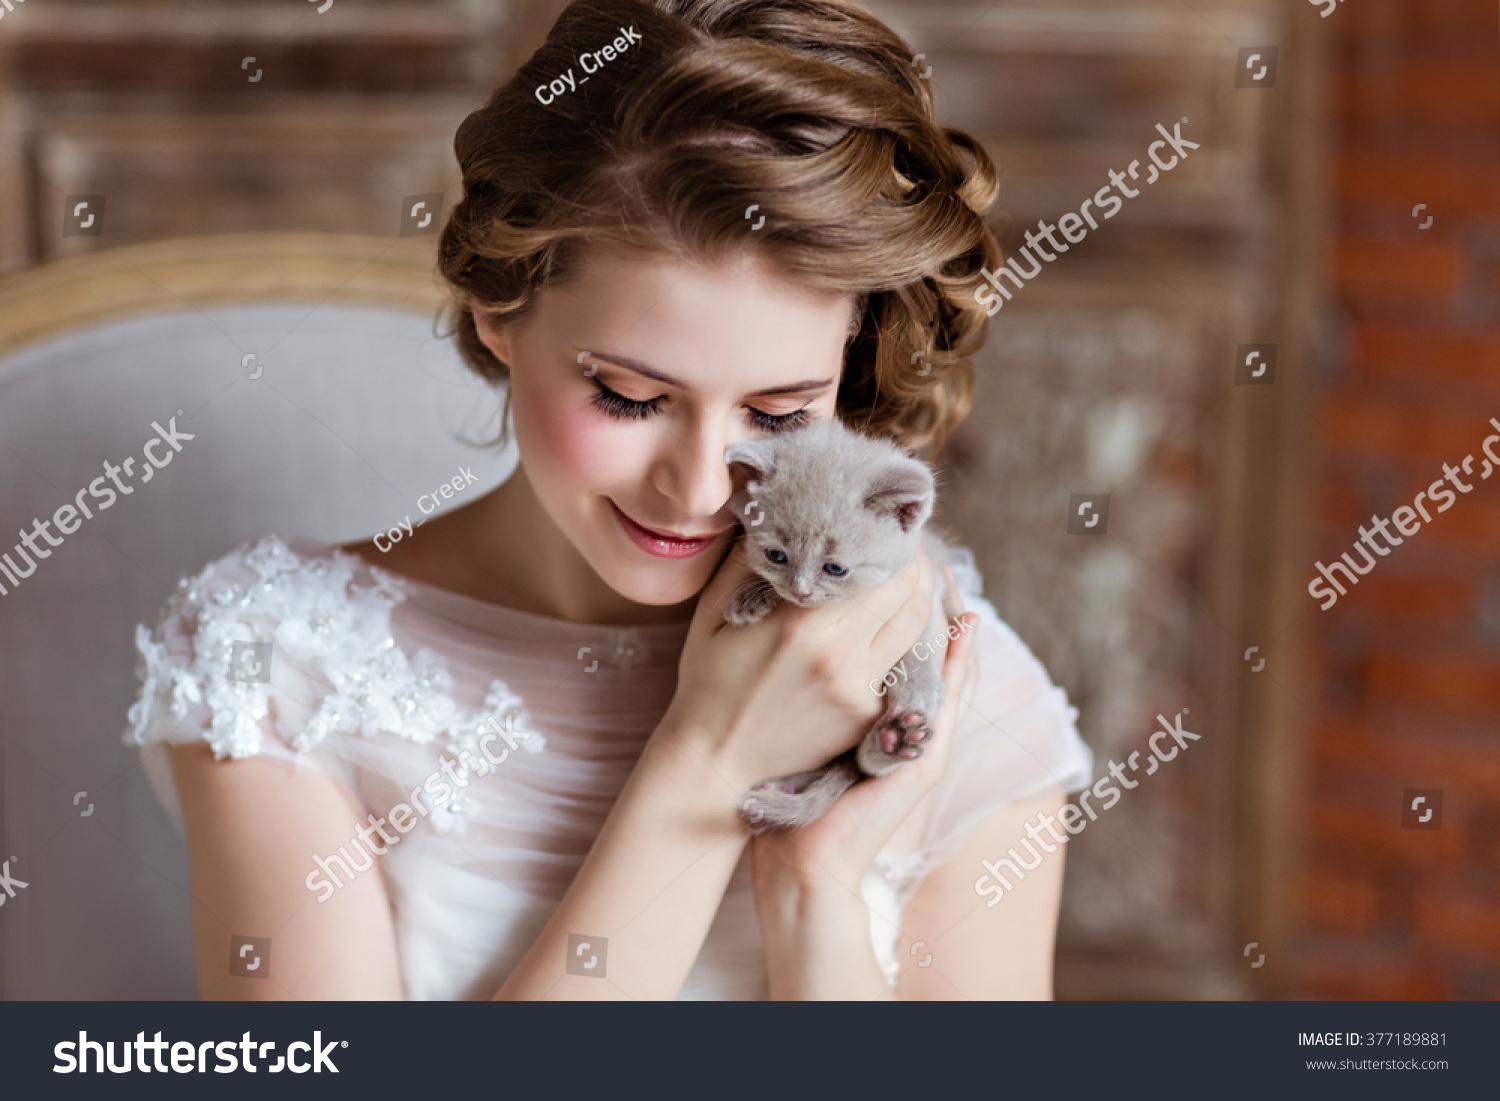 Charming and beautiful girl in white dress sitting on the couch on a background of a brick wall, smiling and holding his little kitten, close-up #377189881